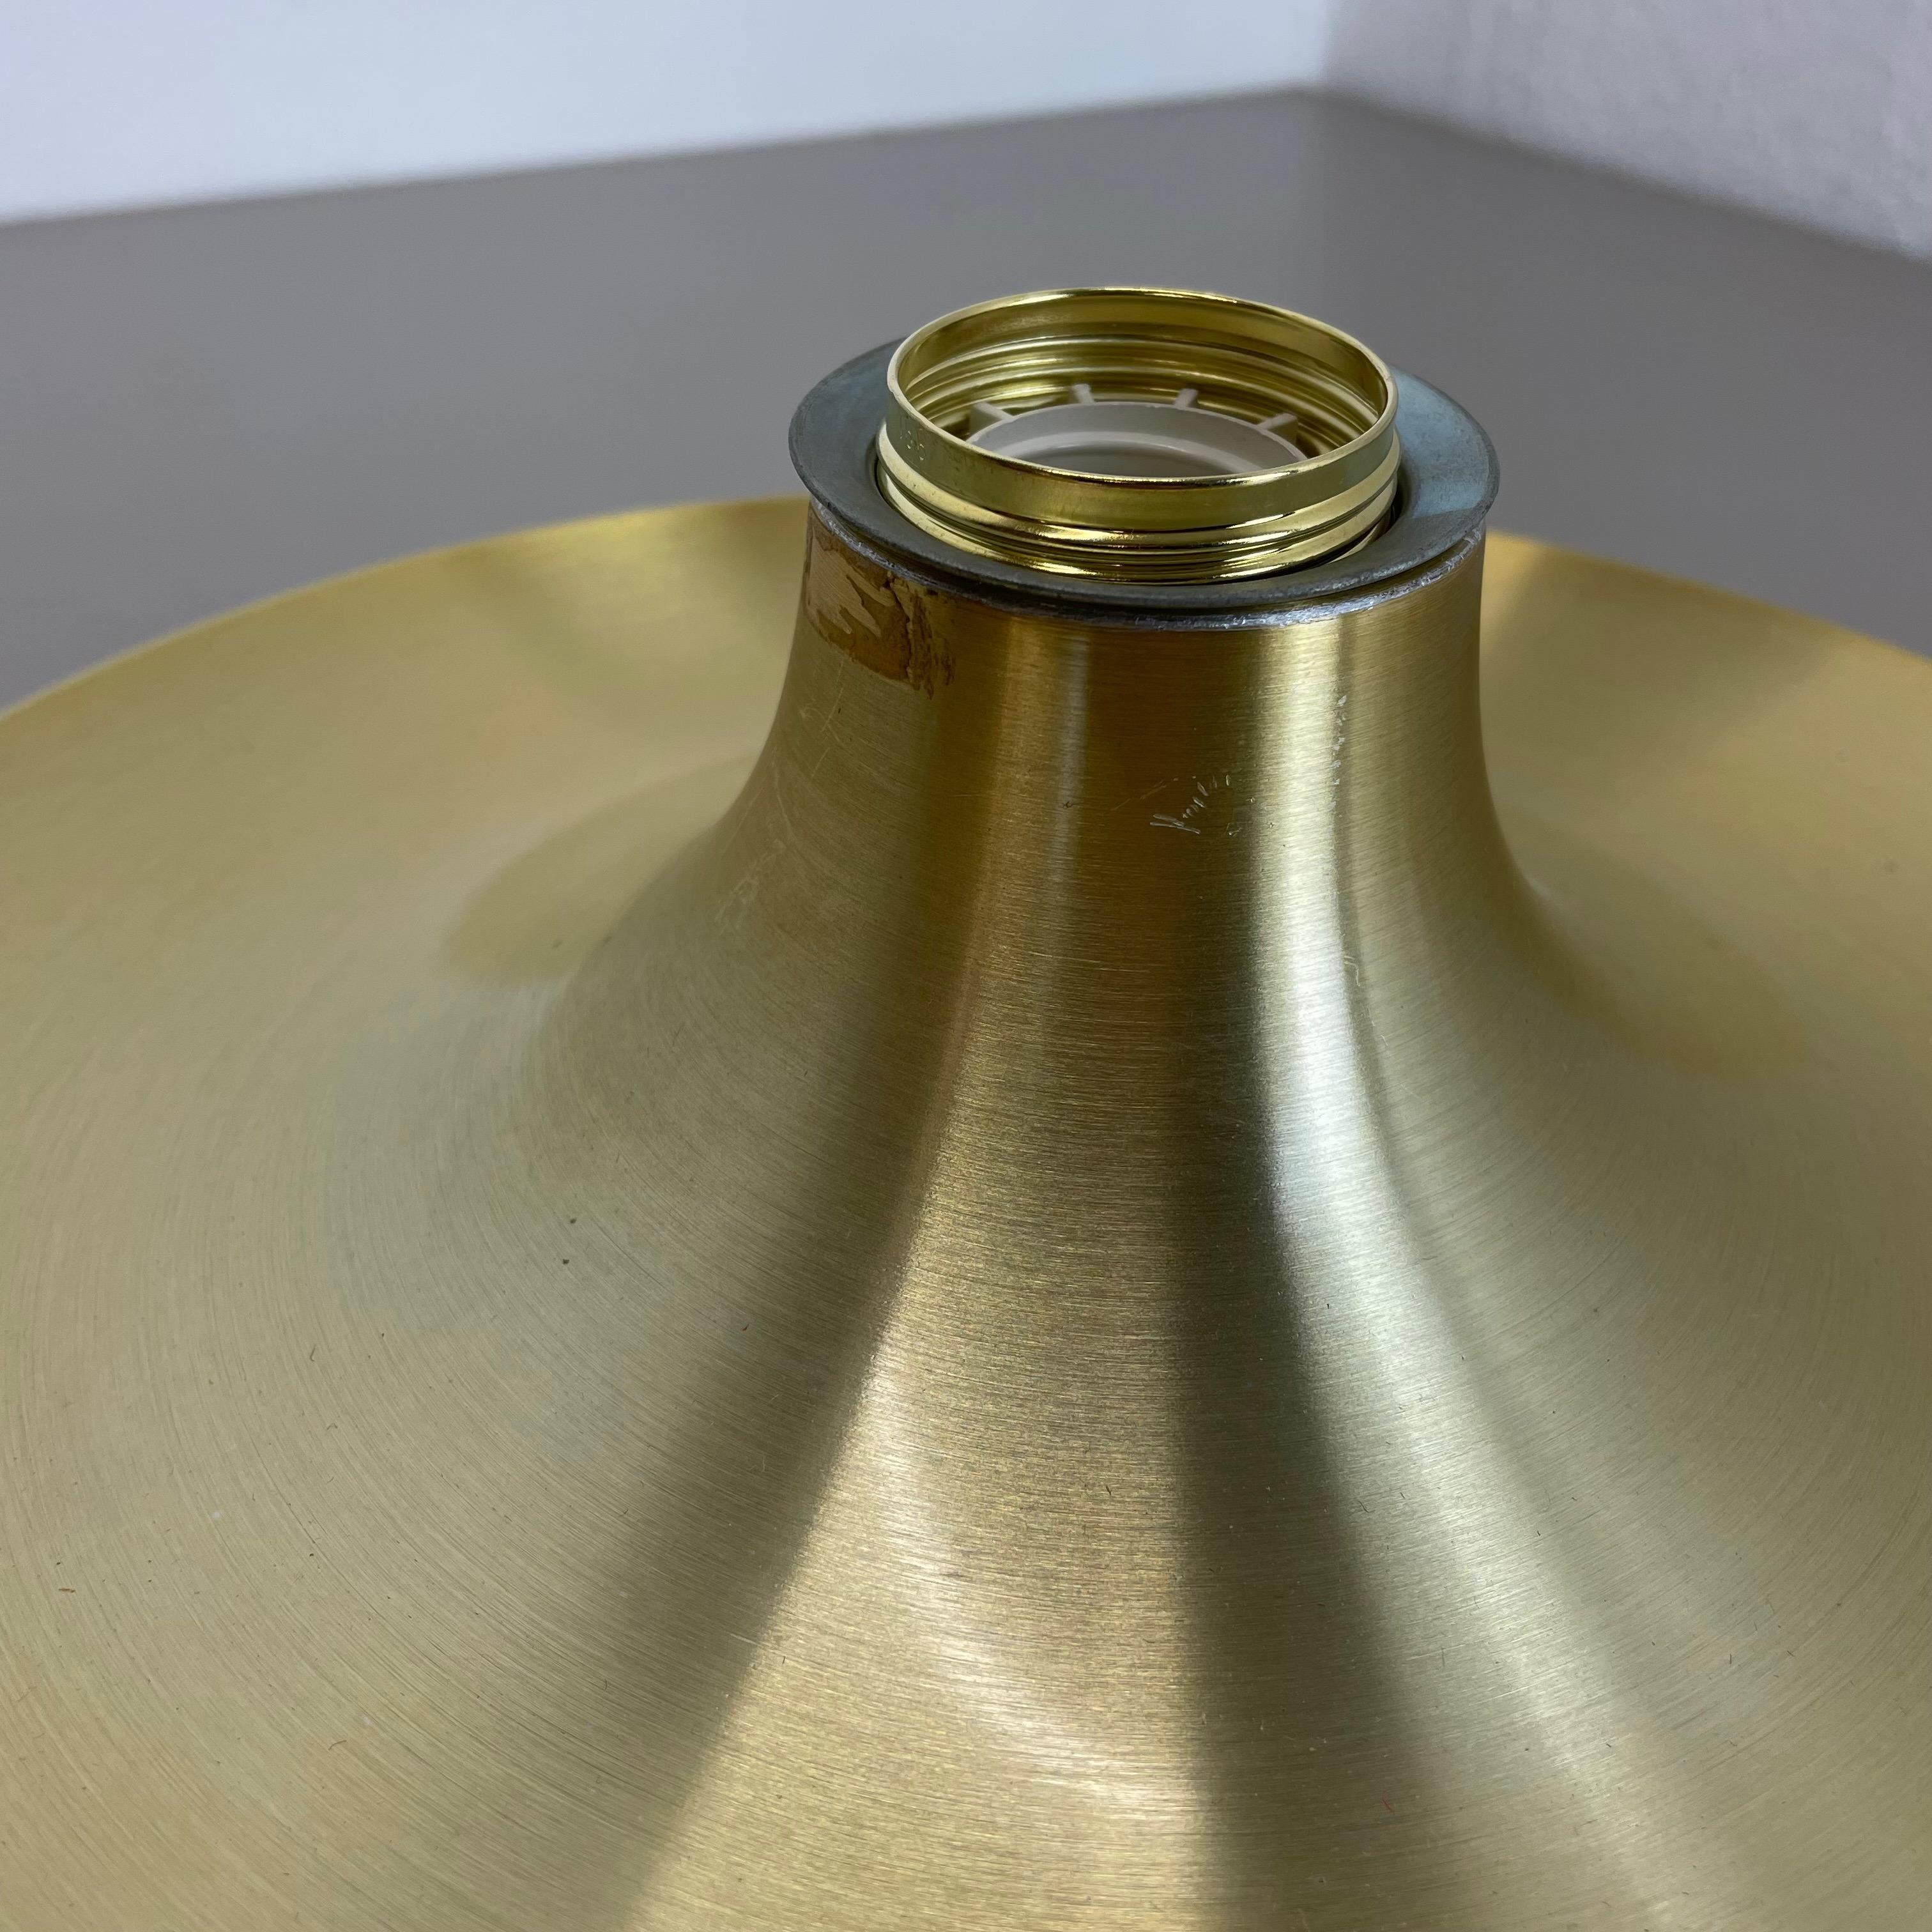 Rare Golden Charlotte Perriand Disc Wall Light by Honsel, Germany 1960s For Sale 6